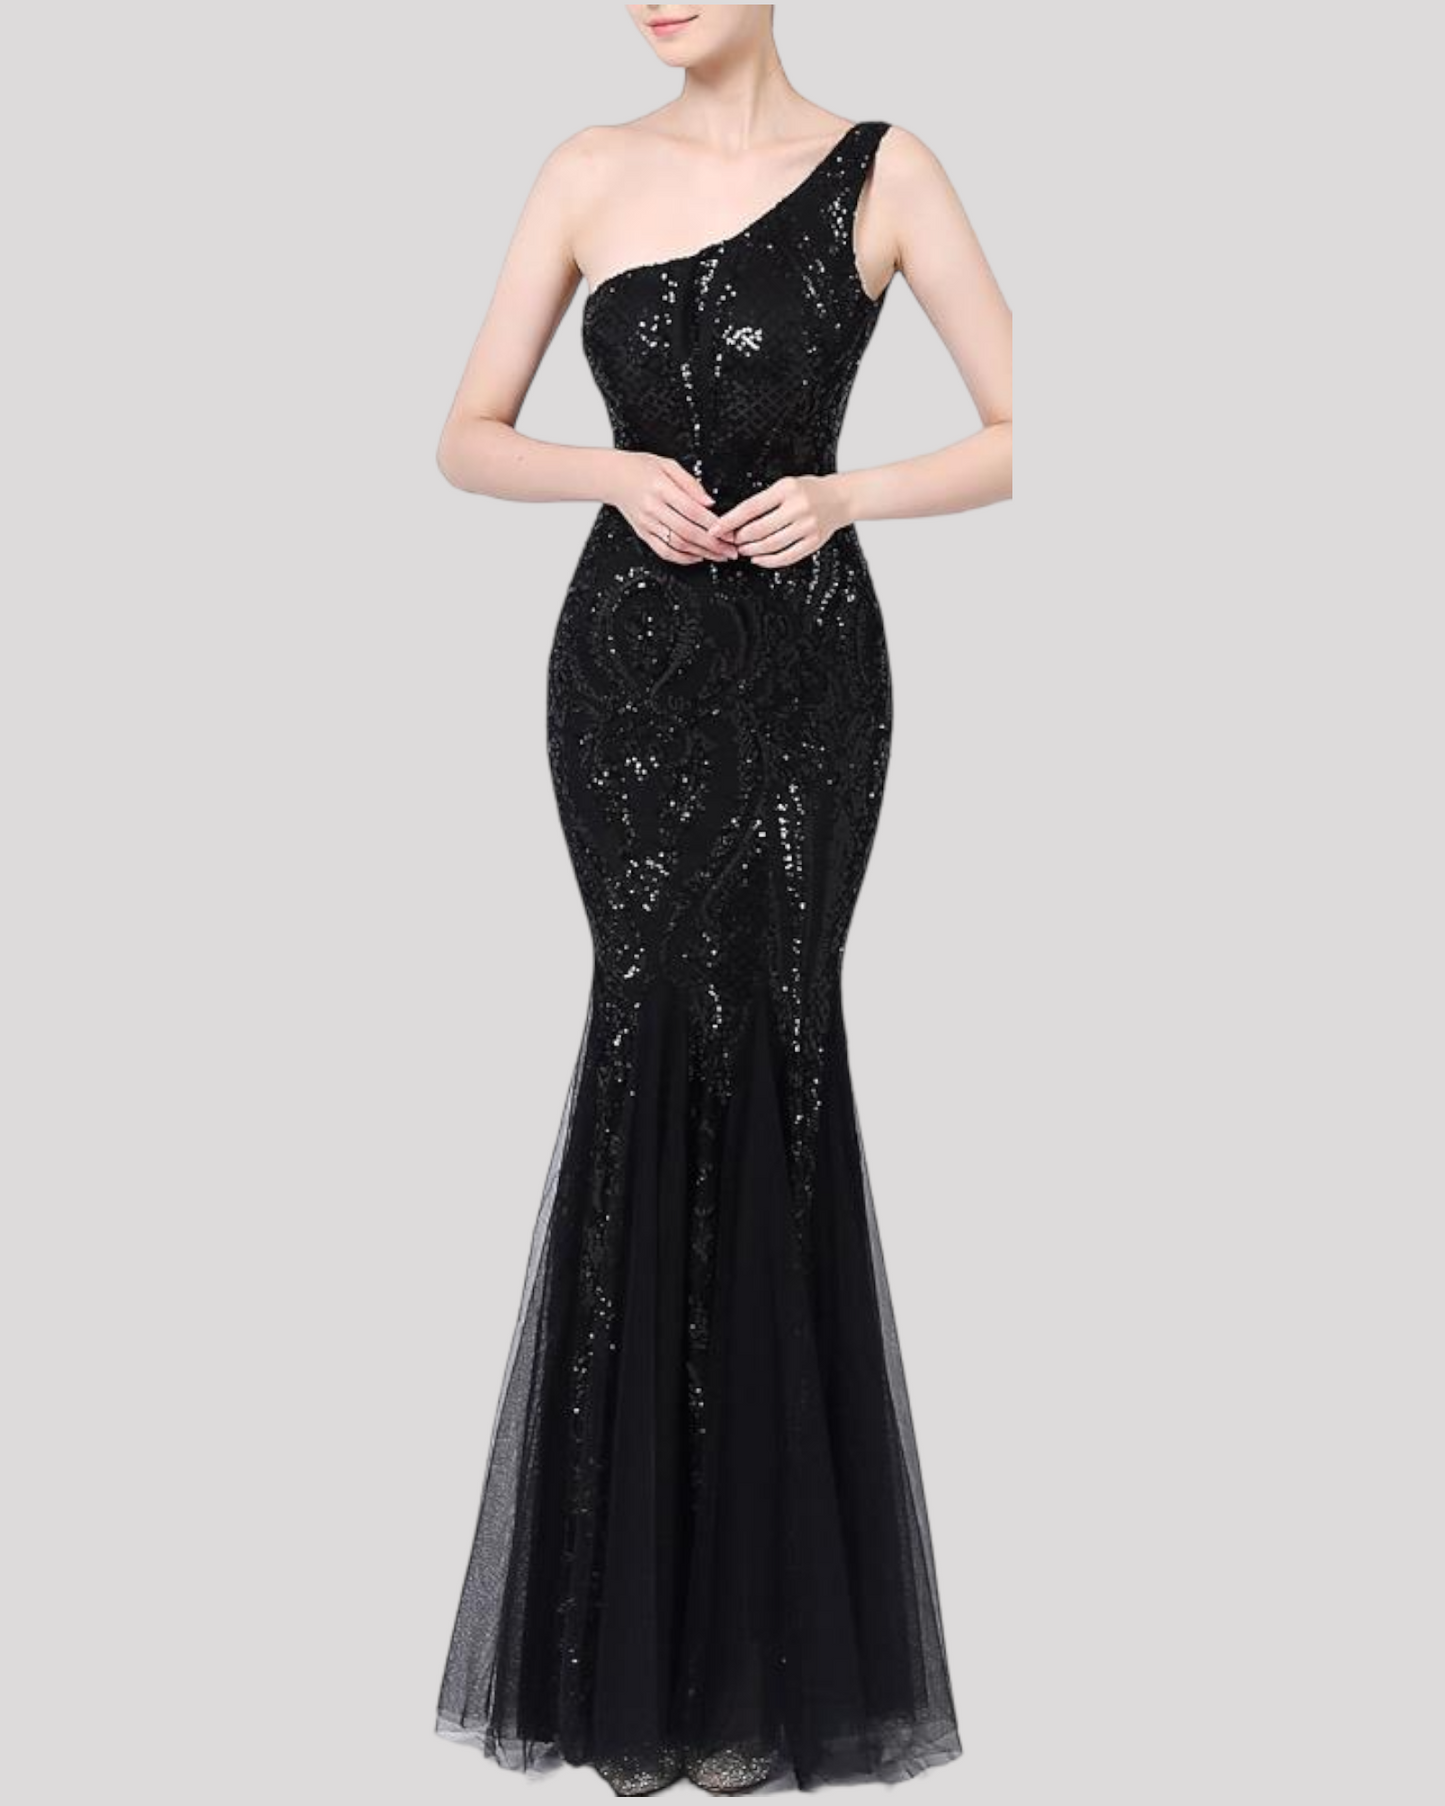 One Shoulder Sequin Mermaid Evening Dress with soft Chiffon Skirt Insert available in 5 Colours